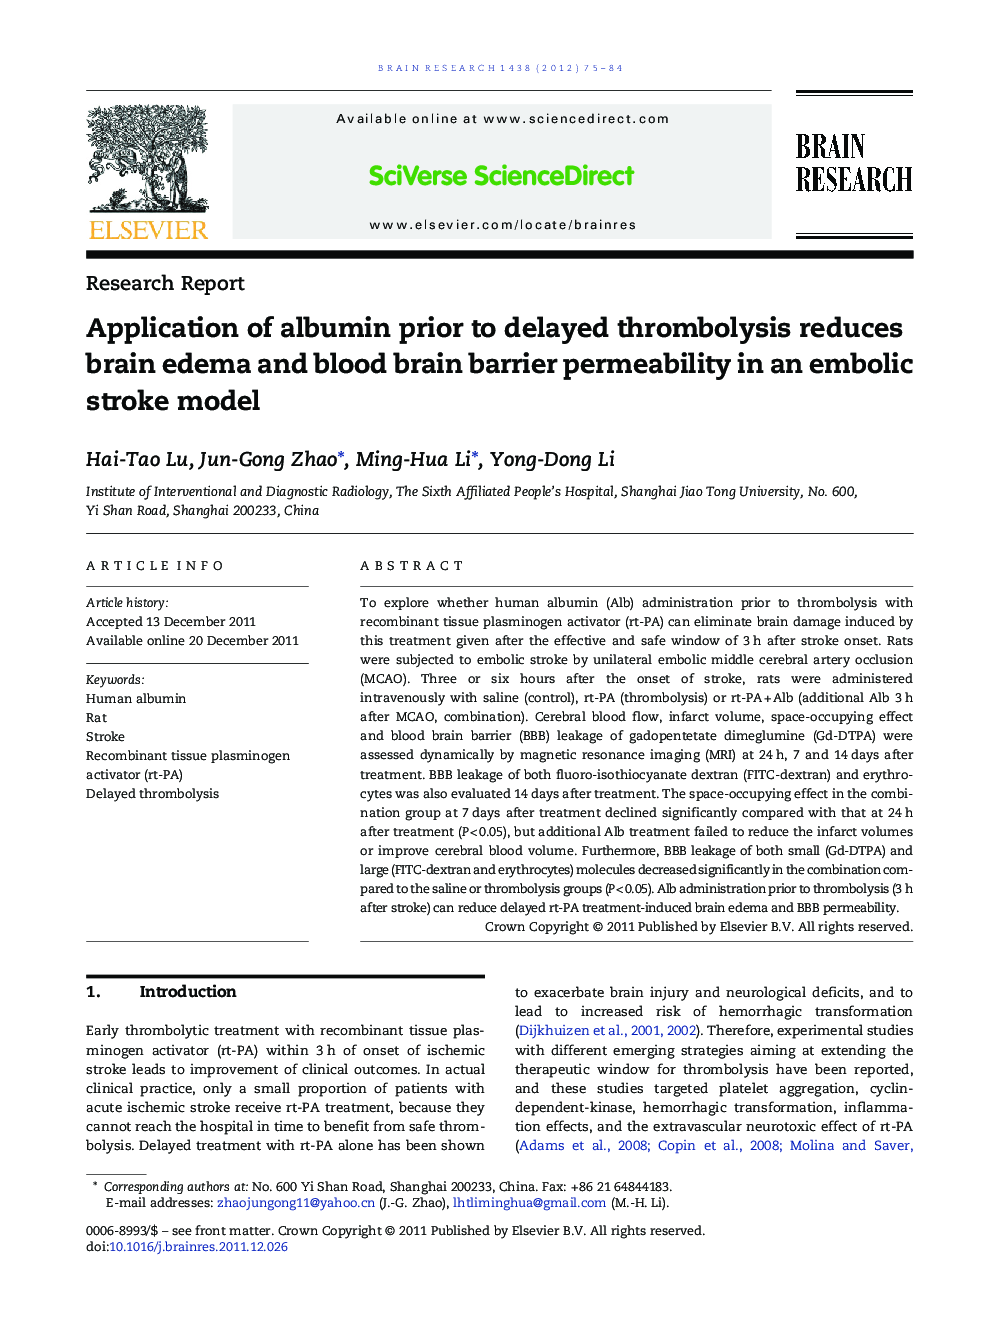 Application of albumin prior to delayed thrombolysis reduces brain edema and blood brain barrier permeability in an embolic stroke model